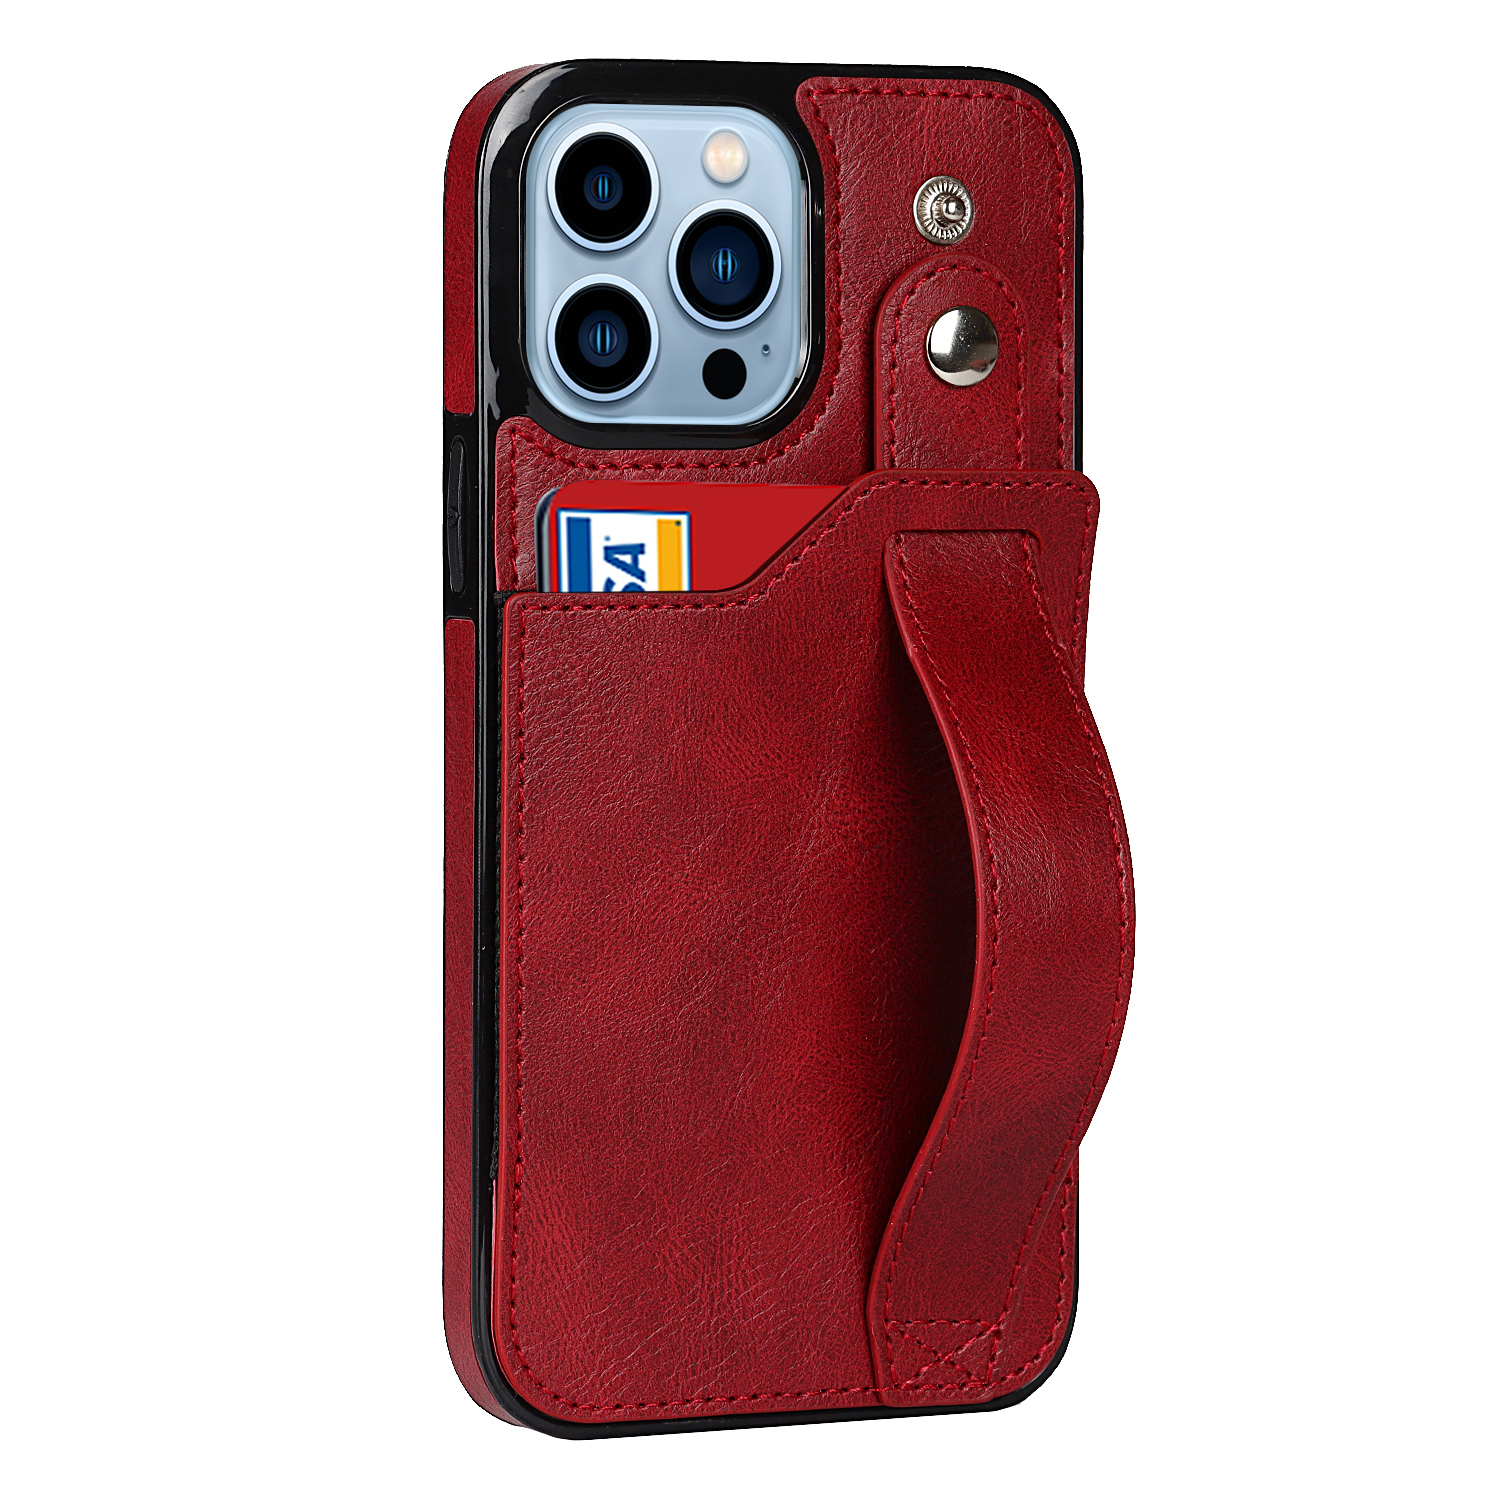 Samsung Galaxy S22 Plus Back Cover Hoesje met Handvat - leer- Handvat - Backcover - Samsung Galaxy S22 Plus - Rood